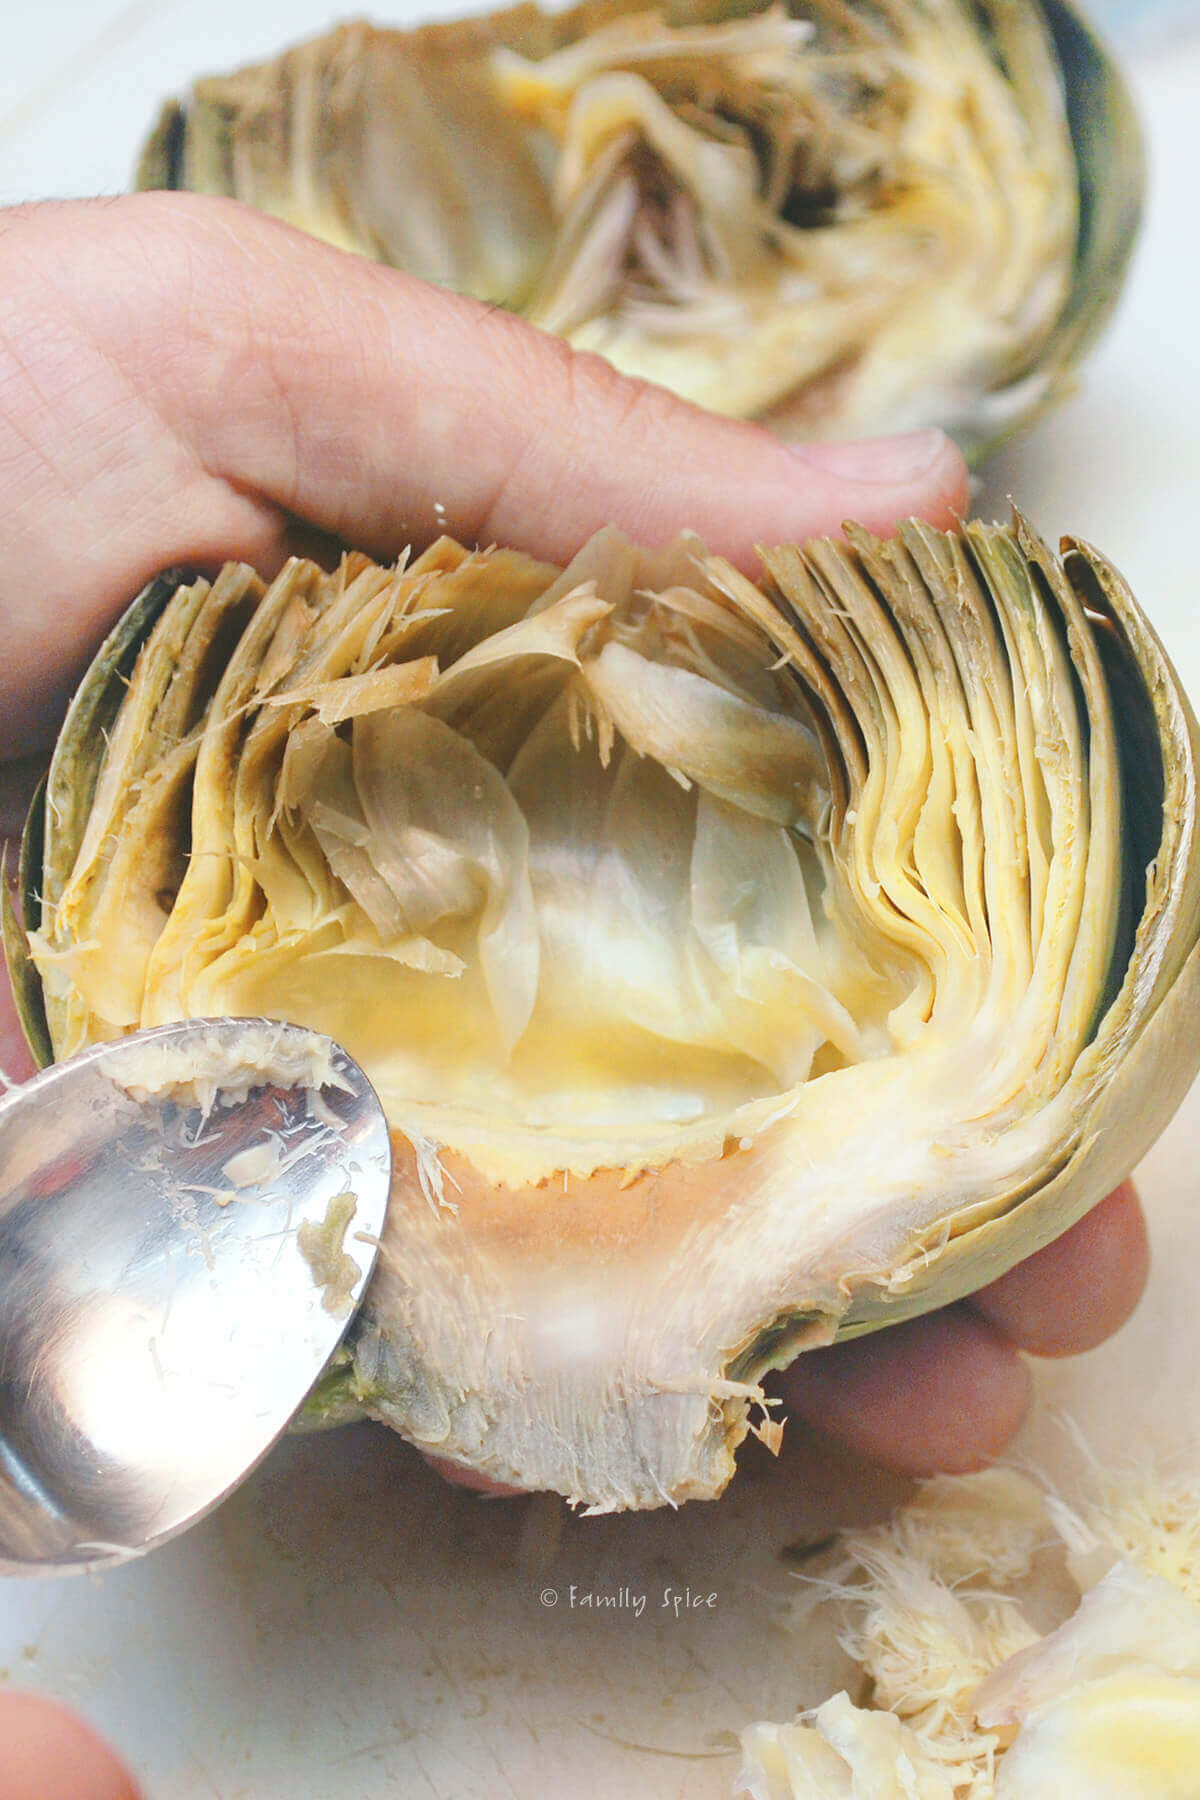 Scooping out the hairy choke from a halved steamed artichoke